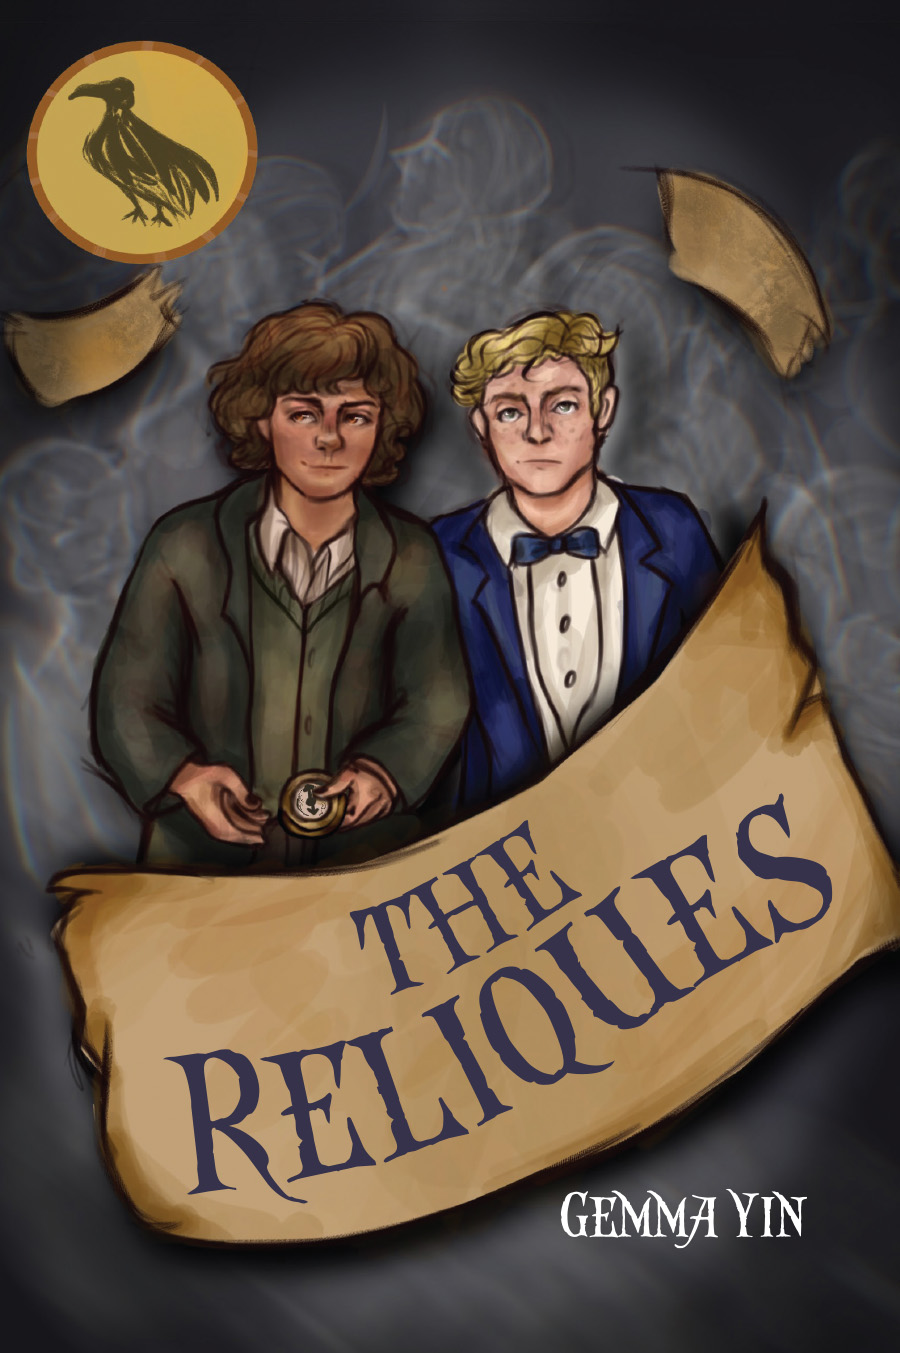 The Reliques by Gemma Yin